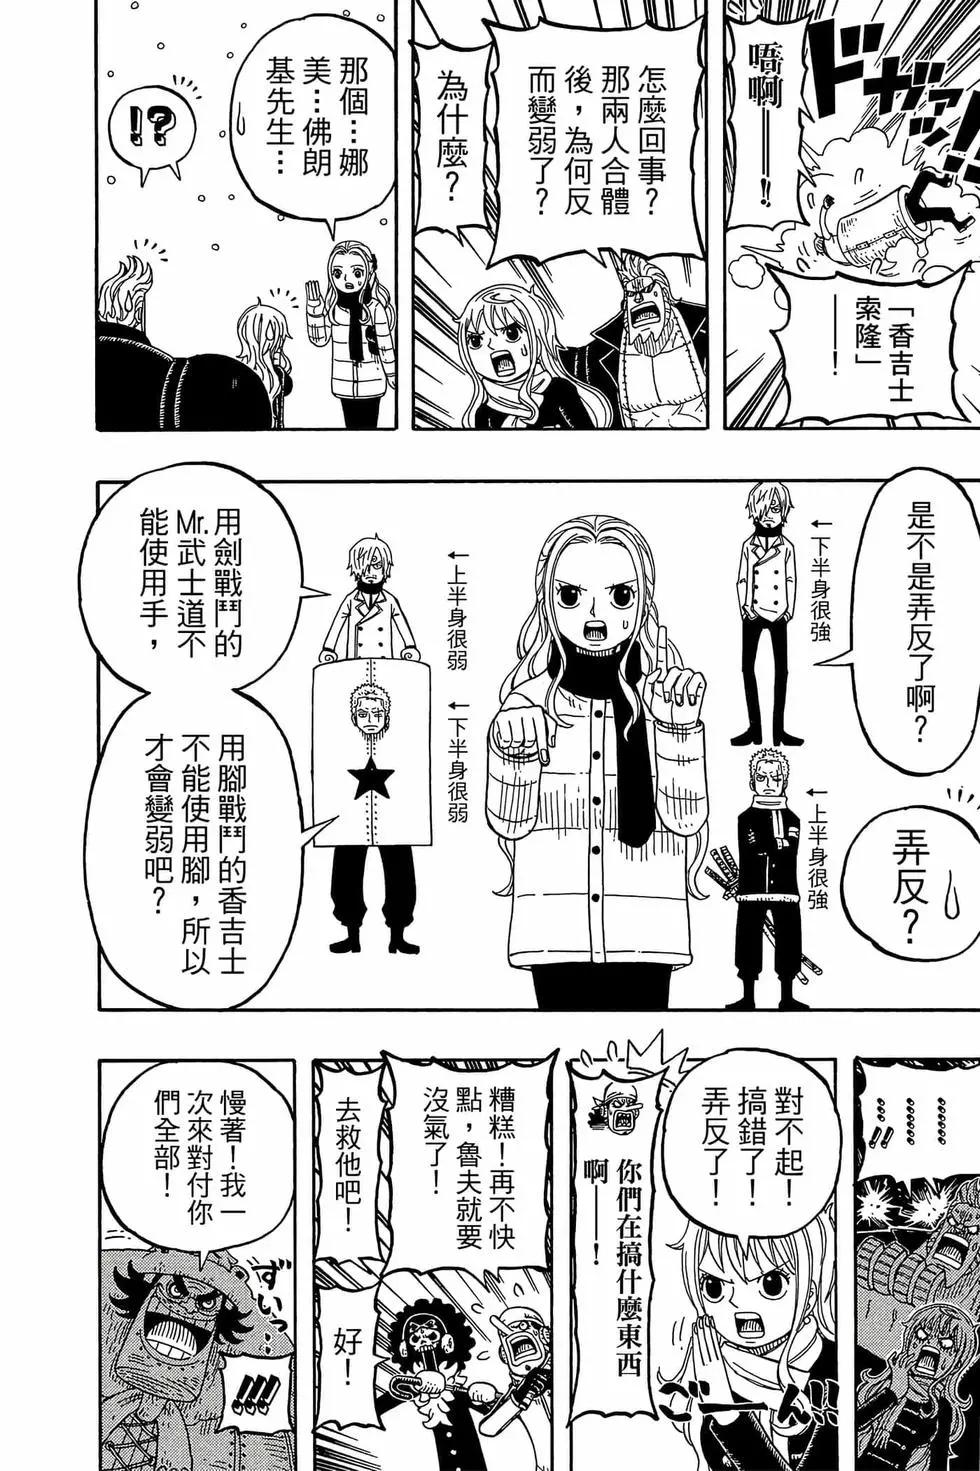 One piece party - 第03卷(1/4) - 7